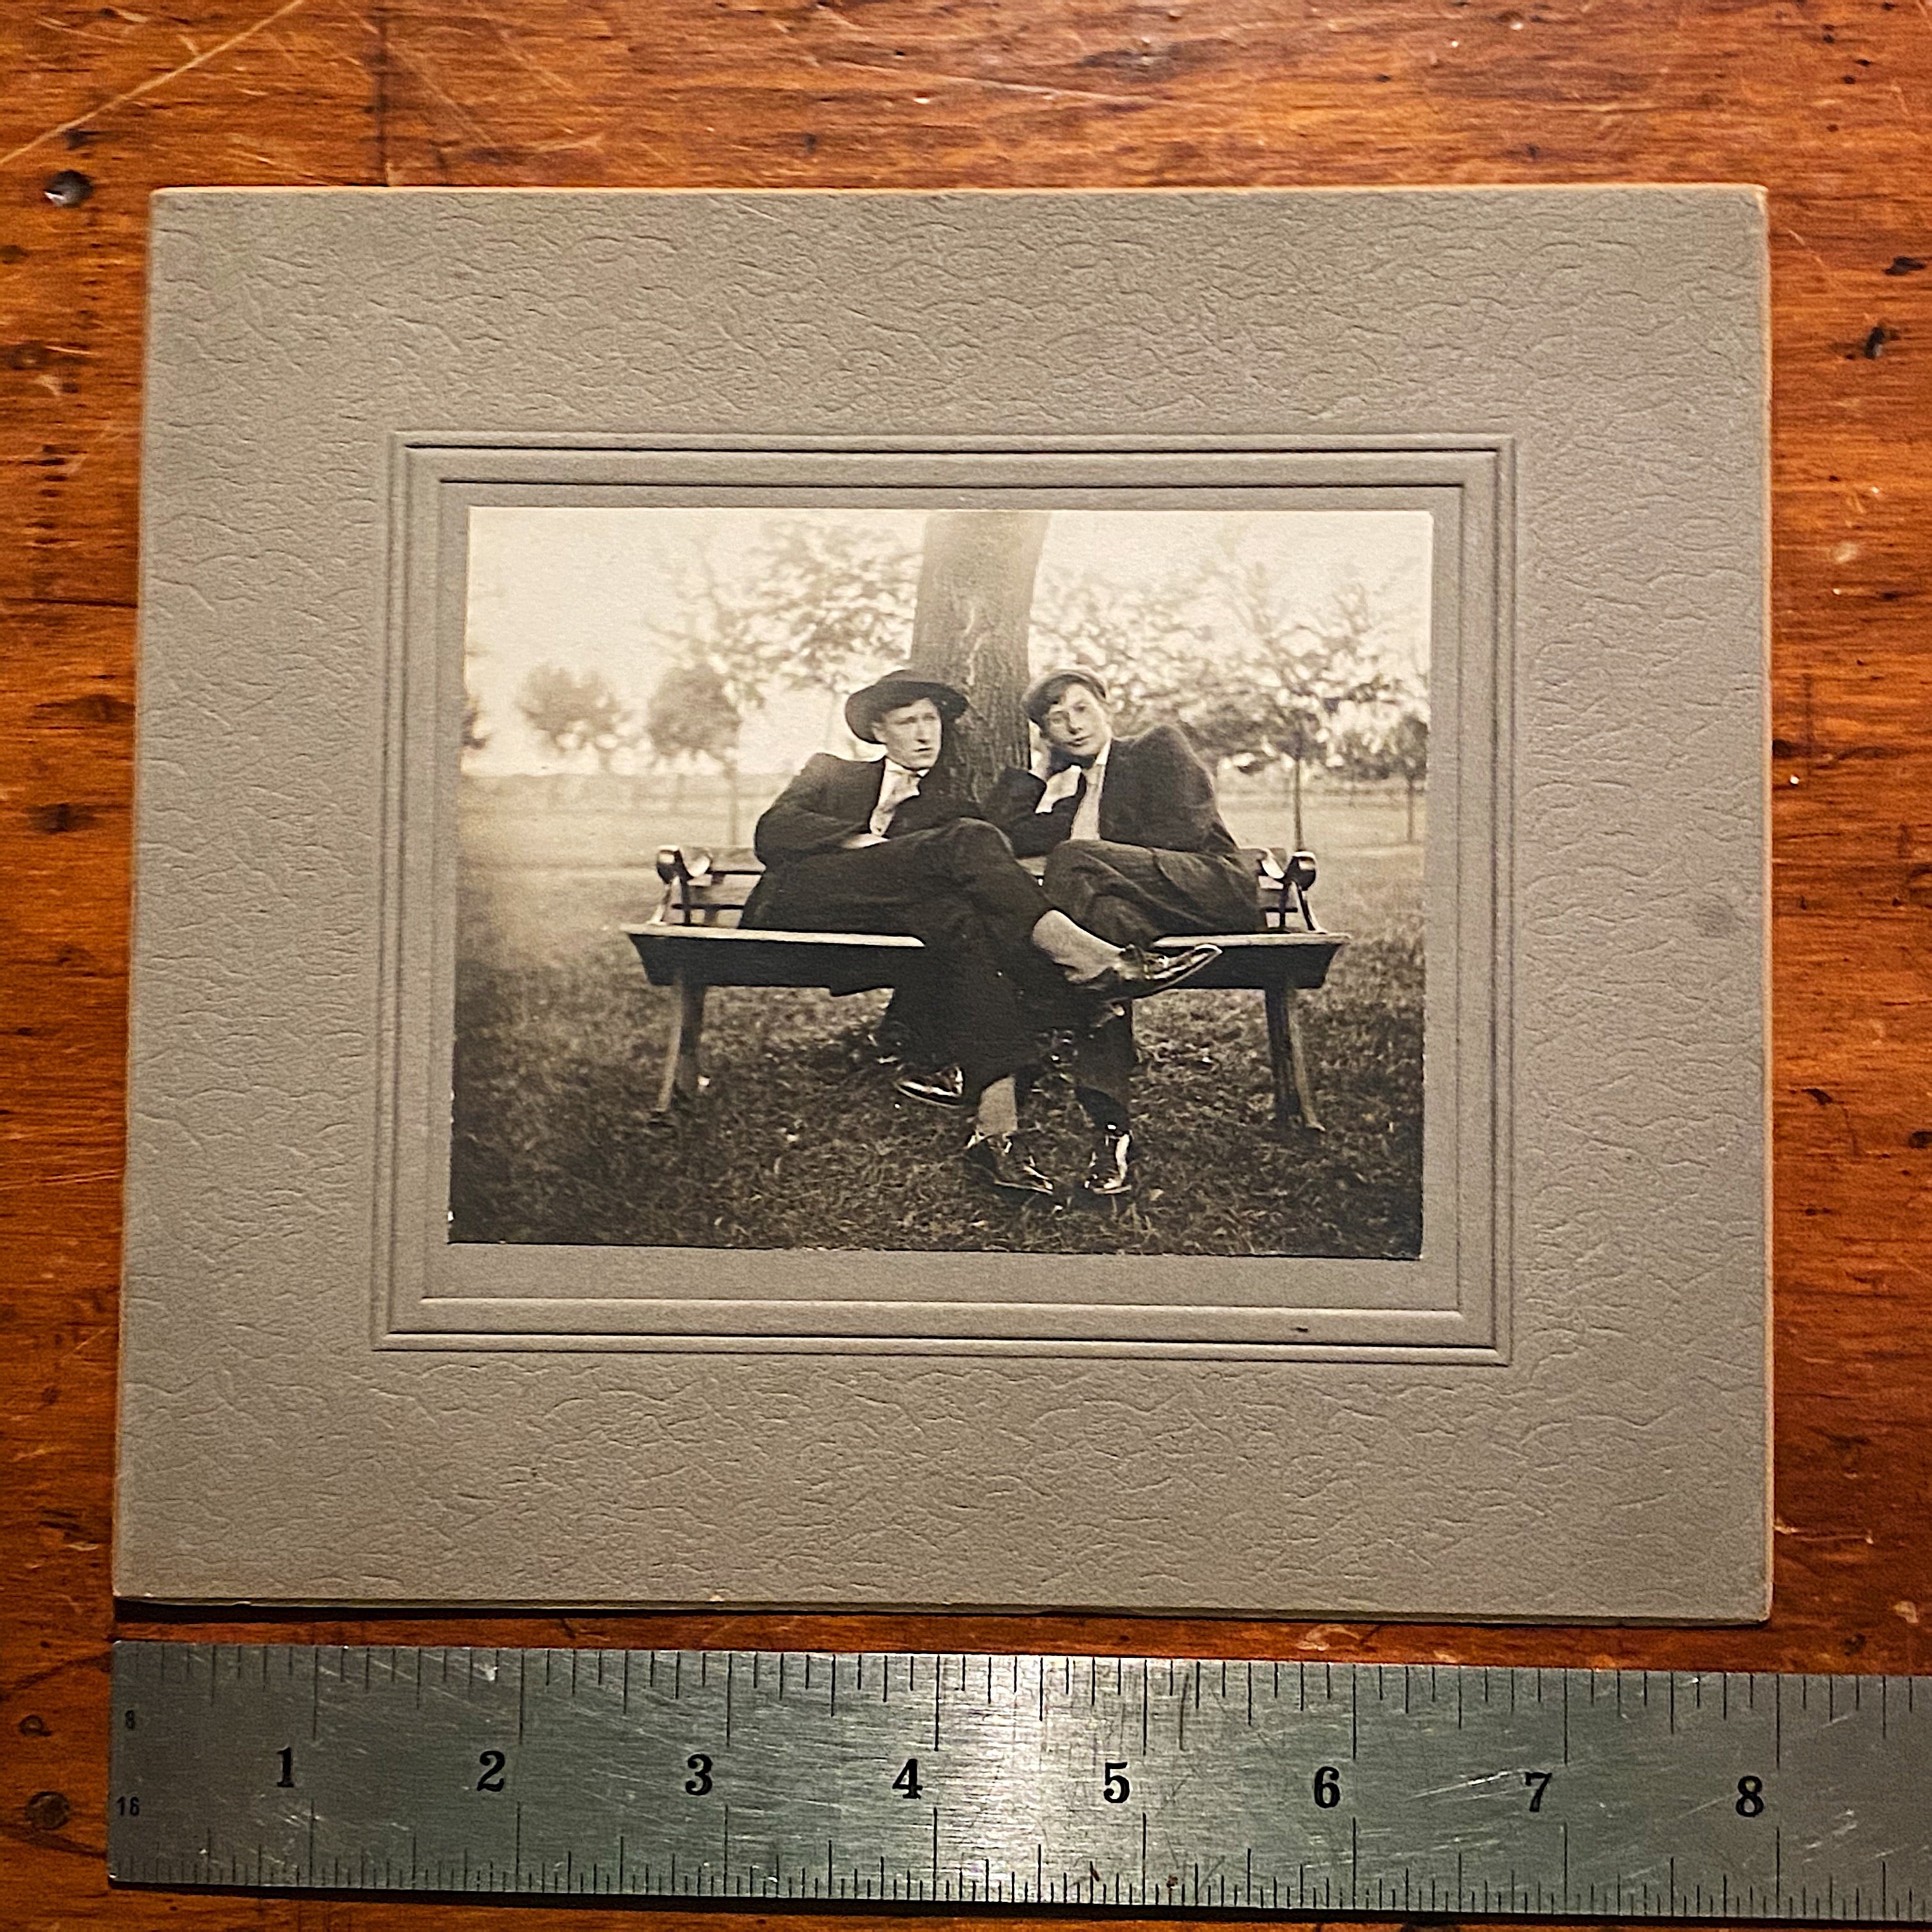 Antique Photograph of 2 Gents Lounging on a Bench | Early 1900s